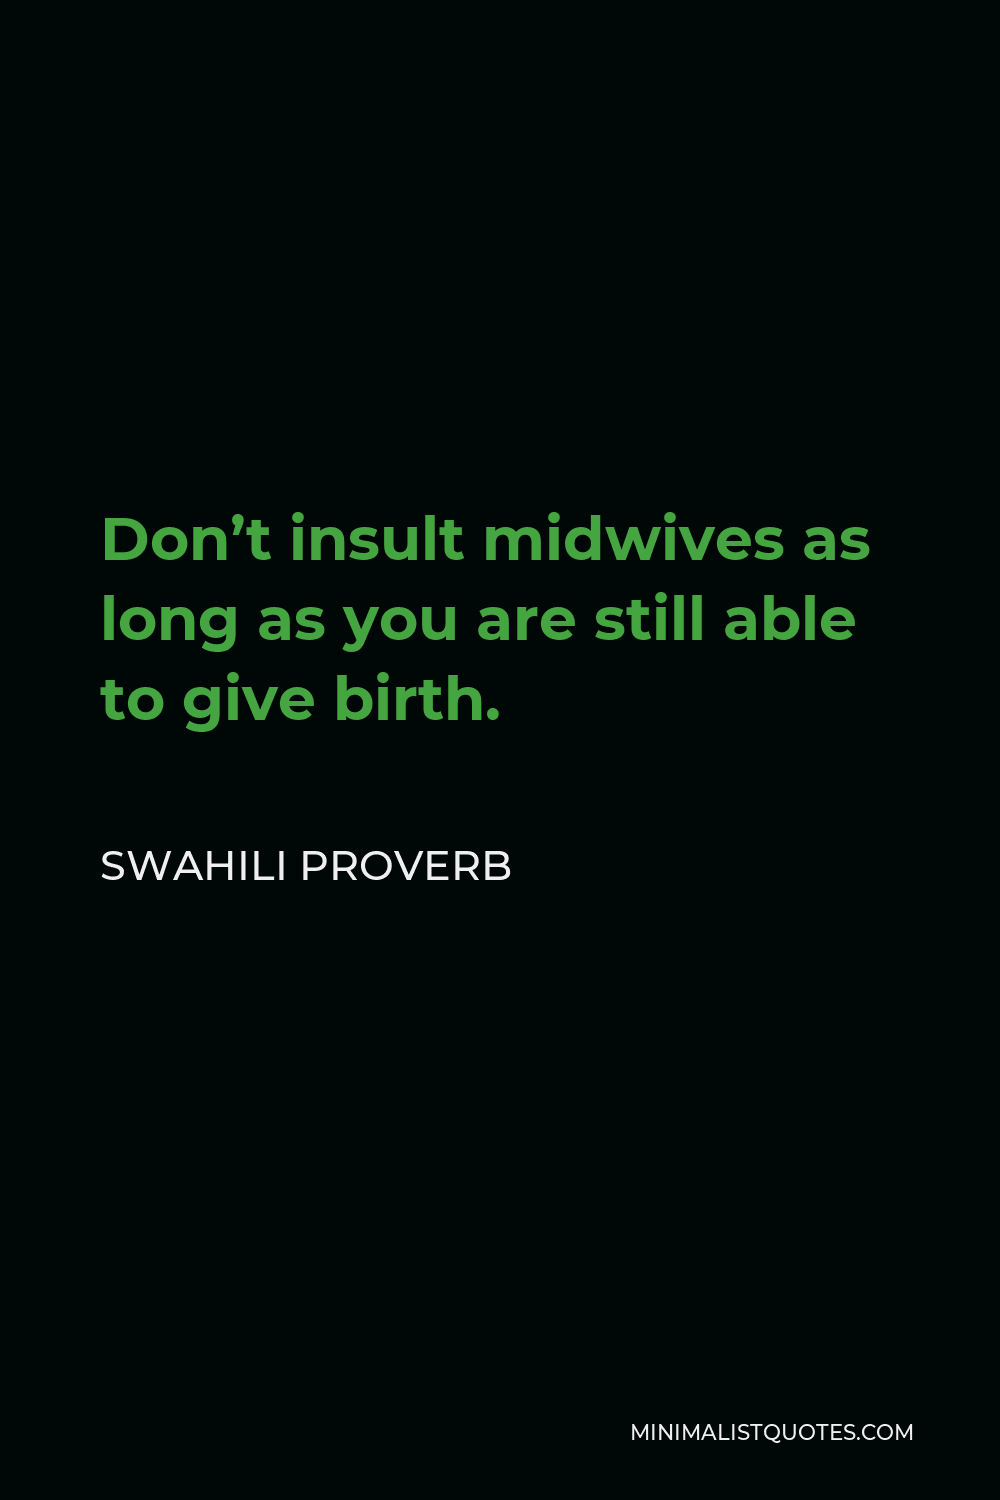 Swahili Proverb Quote - Don’t insult midwives as long as you are still able to give birth.